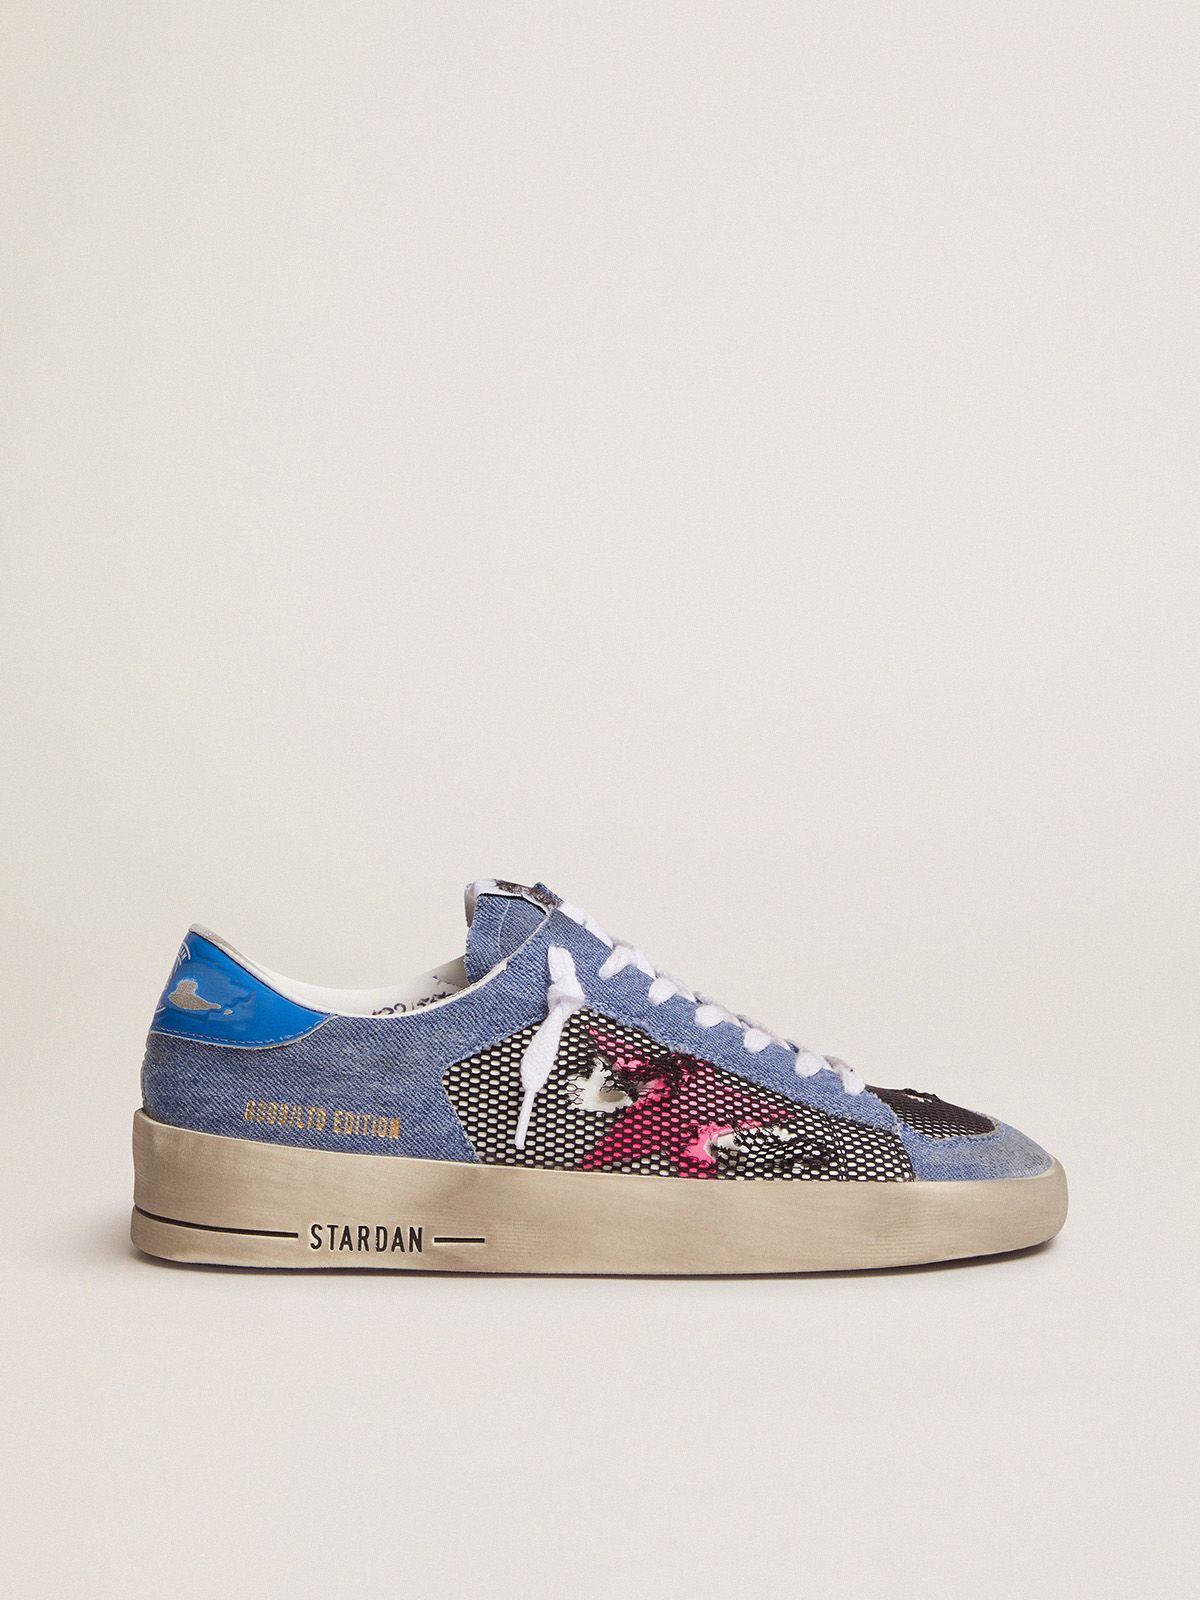 golden goose star Women's fuchsia Limited LAB sneakers denim with Edition Stardan